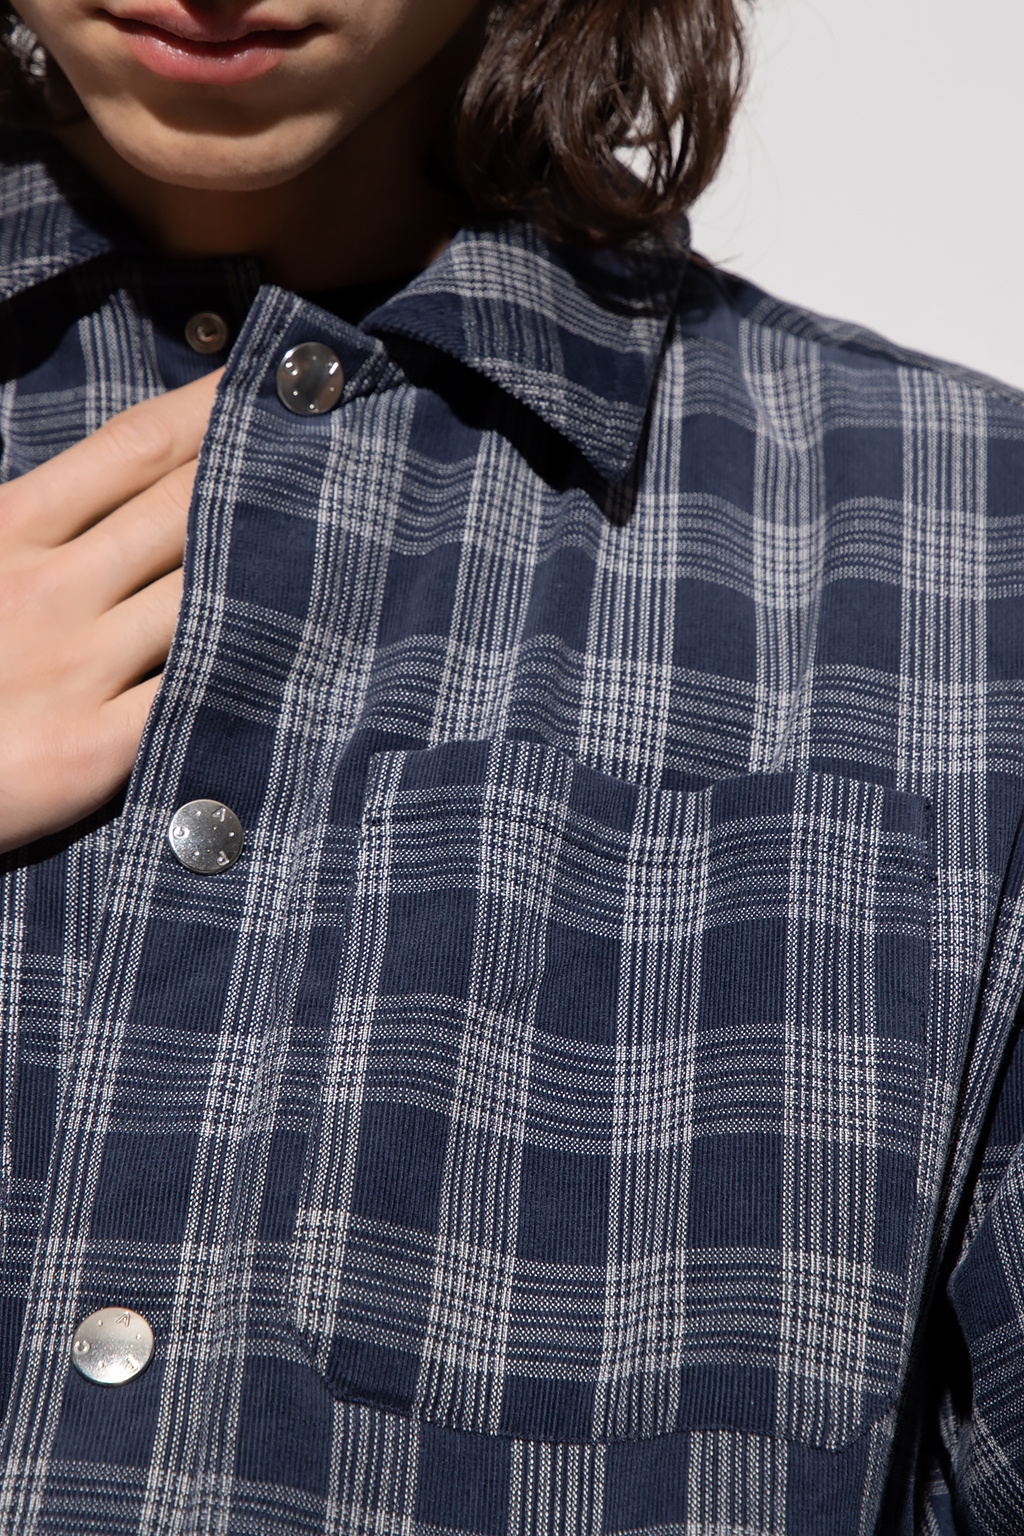 A.P.C. ‘Marco’ checked jacket